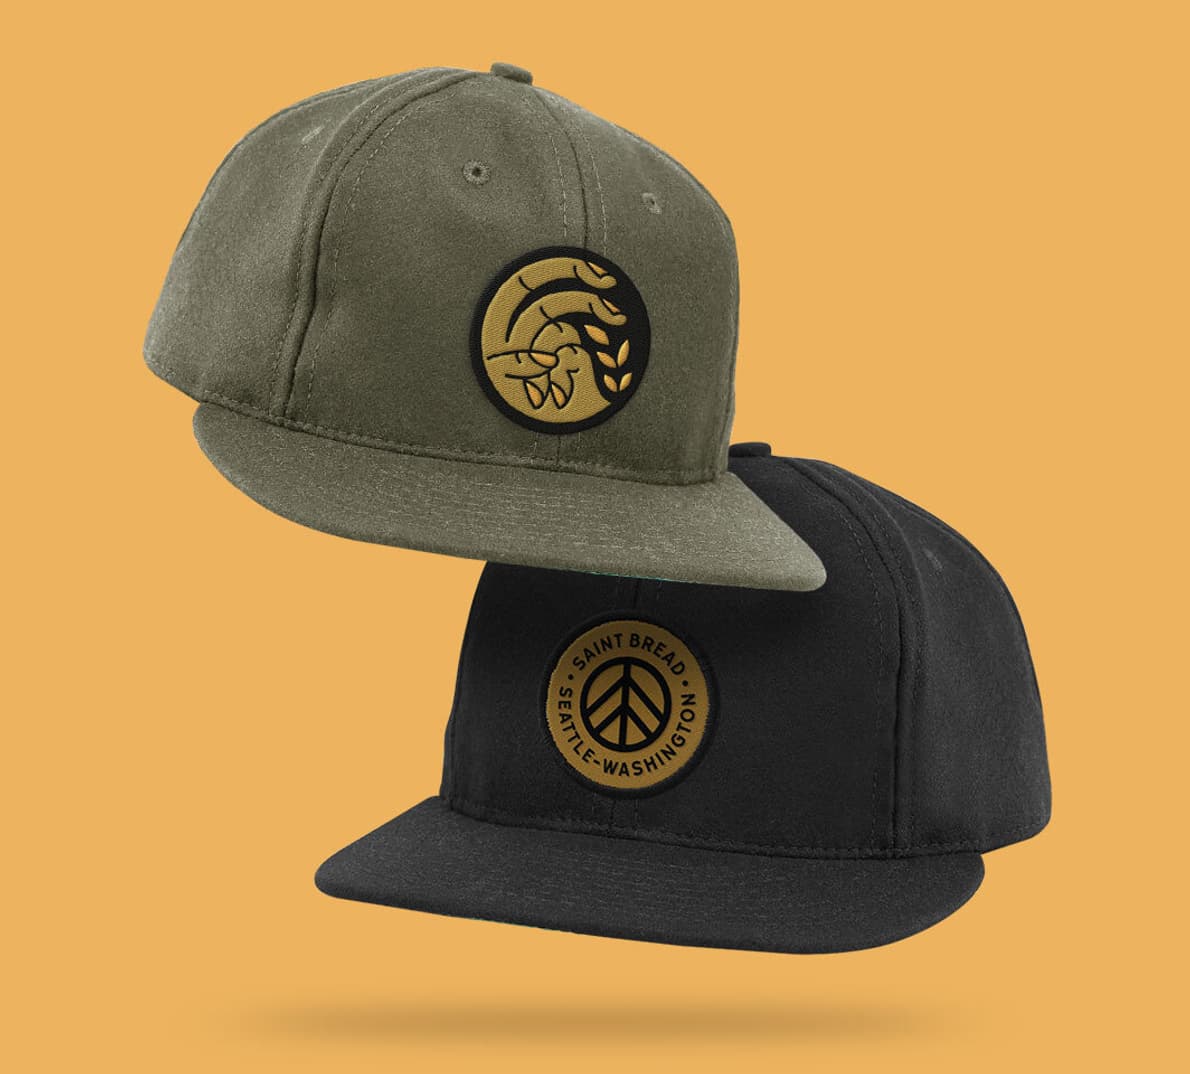 A black and a green Saint Bread hat on a yellow background.